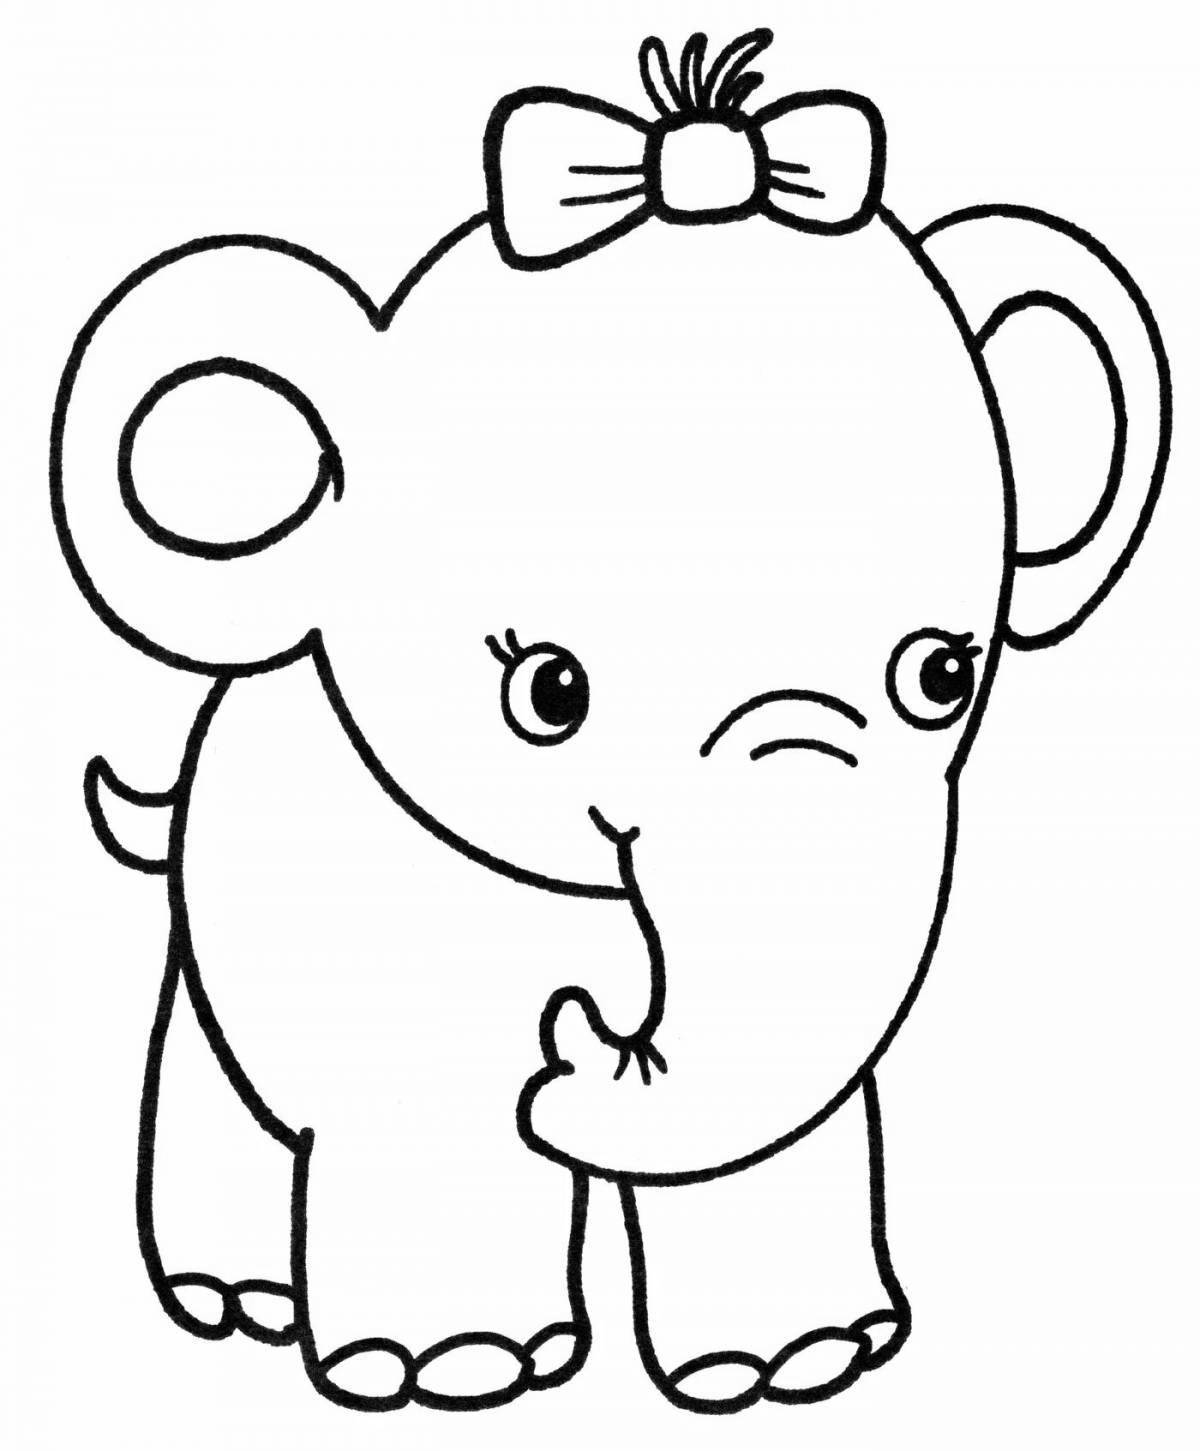 Unique elephant coloring book for 3-4 year olds